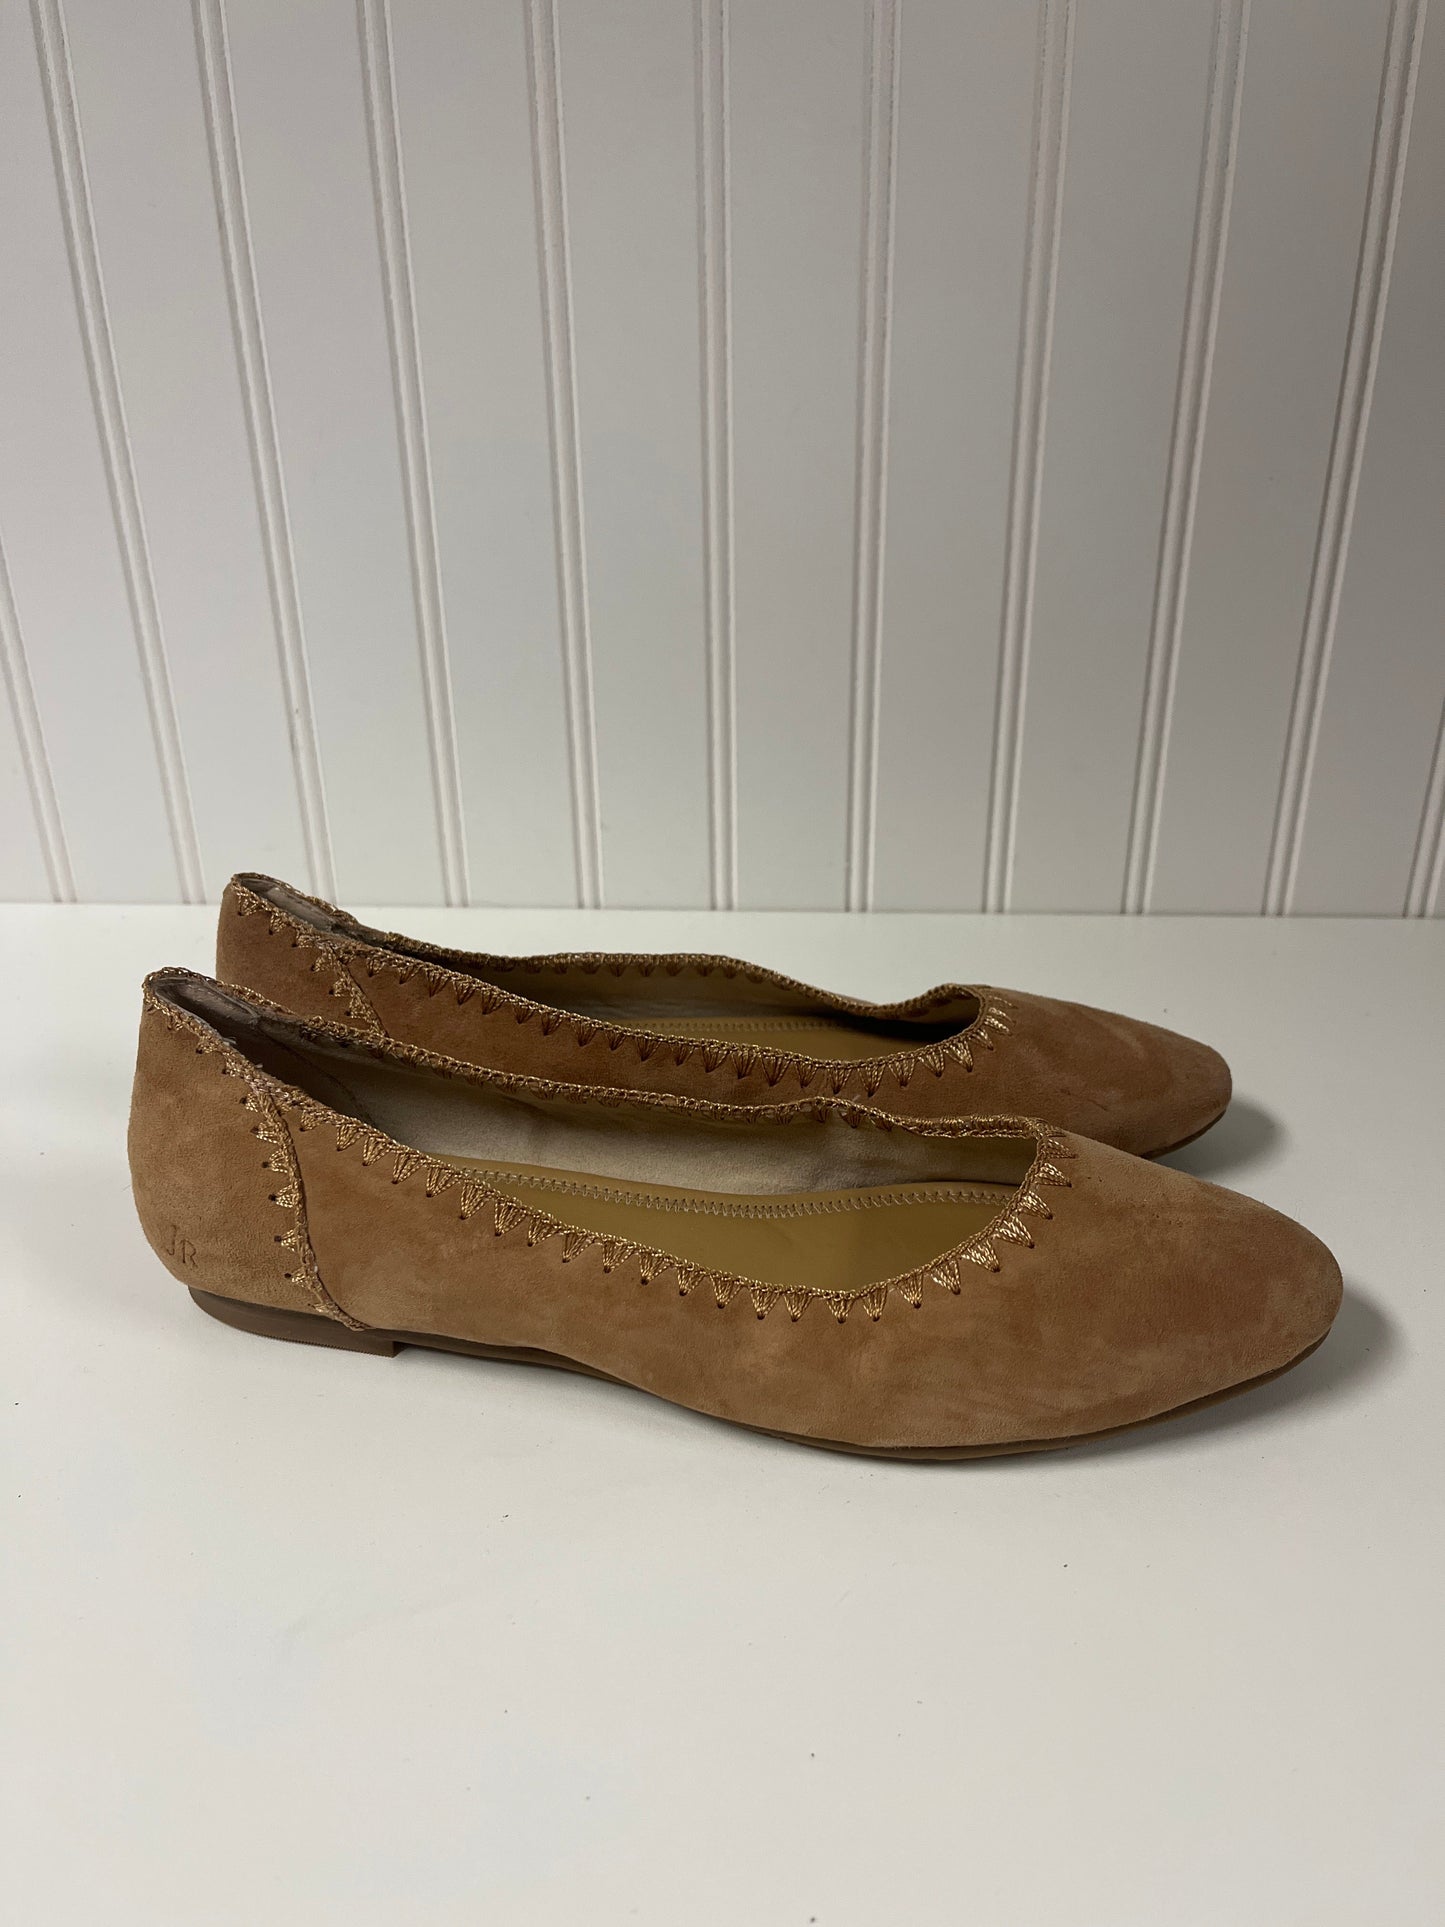 Shoes Flats By Jack Rogers  Size: 8